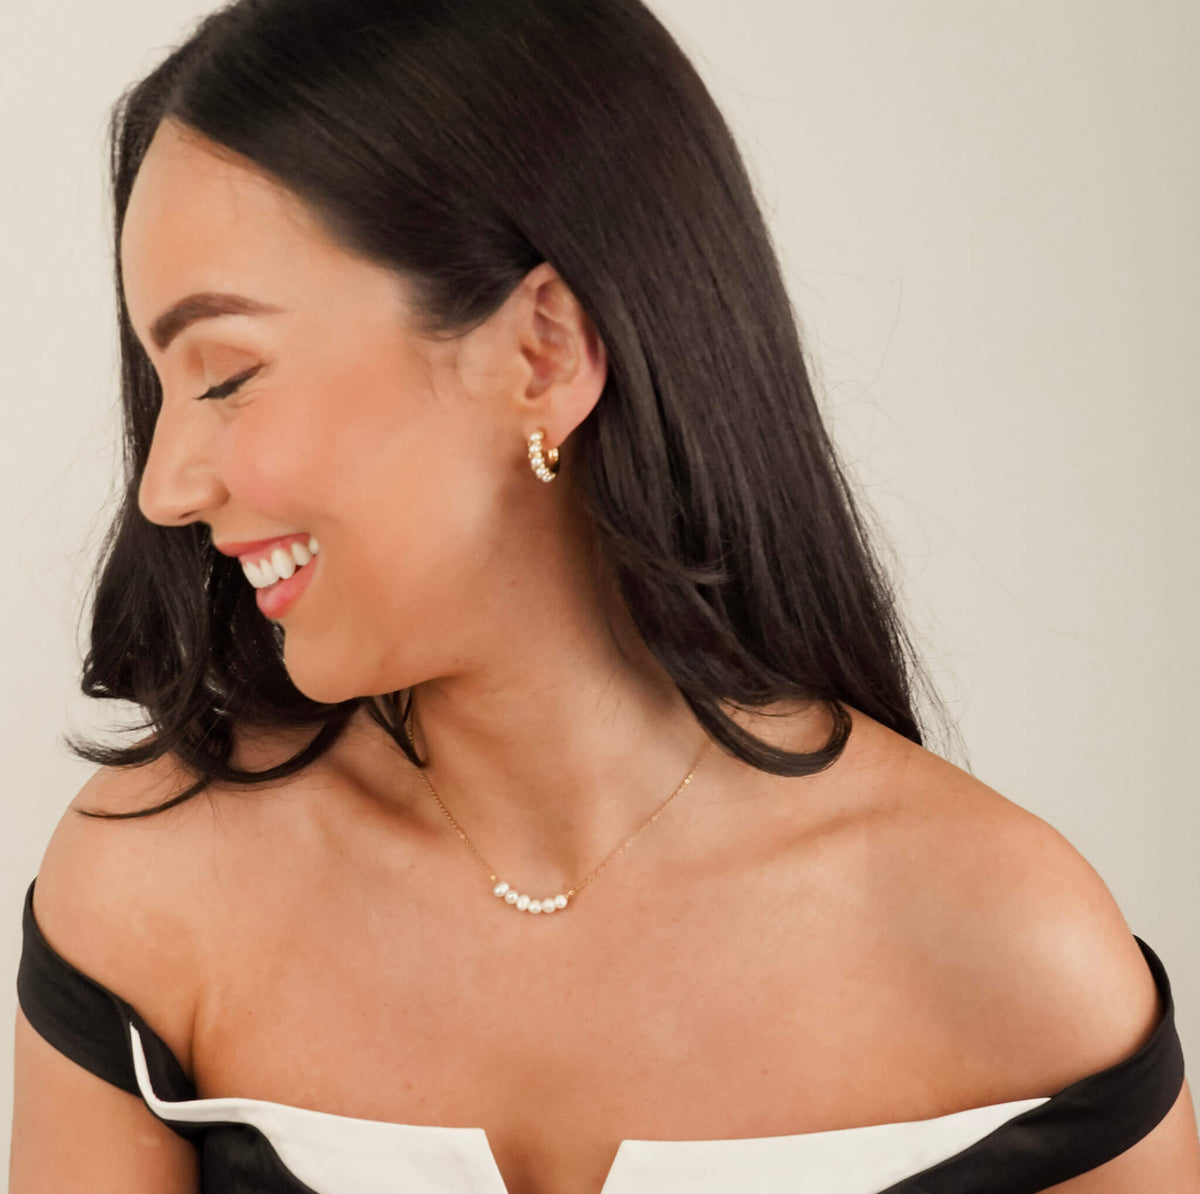 this photo shows a pearl necklace and matching  pearl earrings worn by a model. She is laughing. The pearls are bright and eye catching. The necklace has an elegant gold chain and the 6 freshwater pearls can move freely along it.  